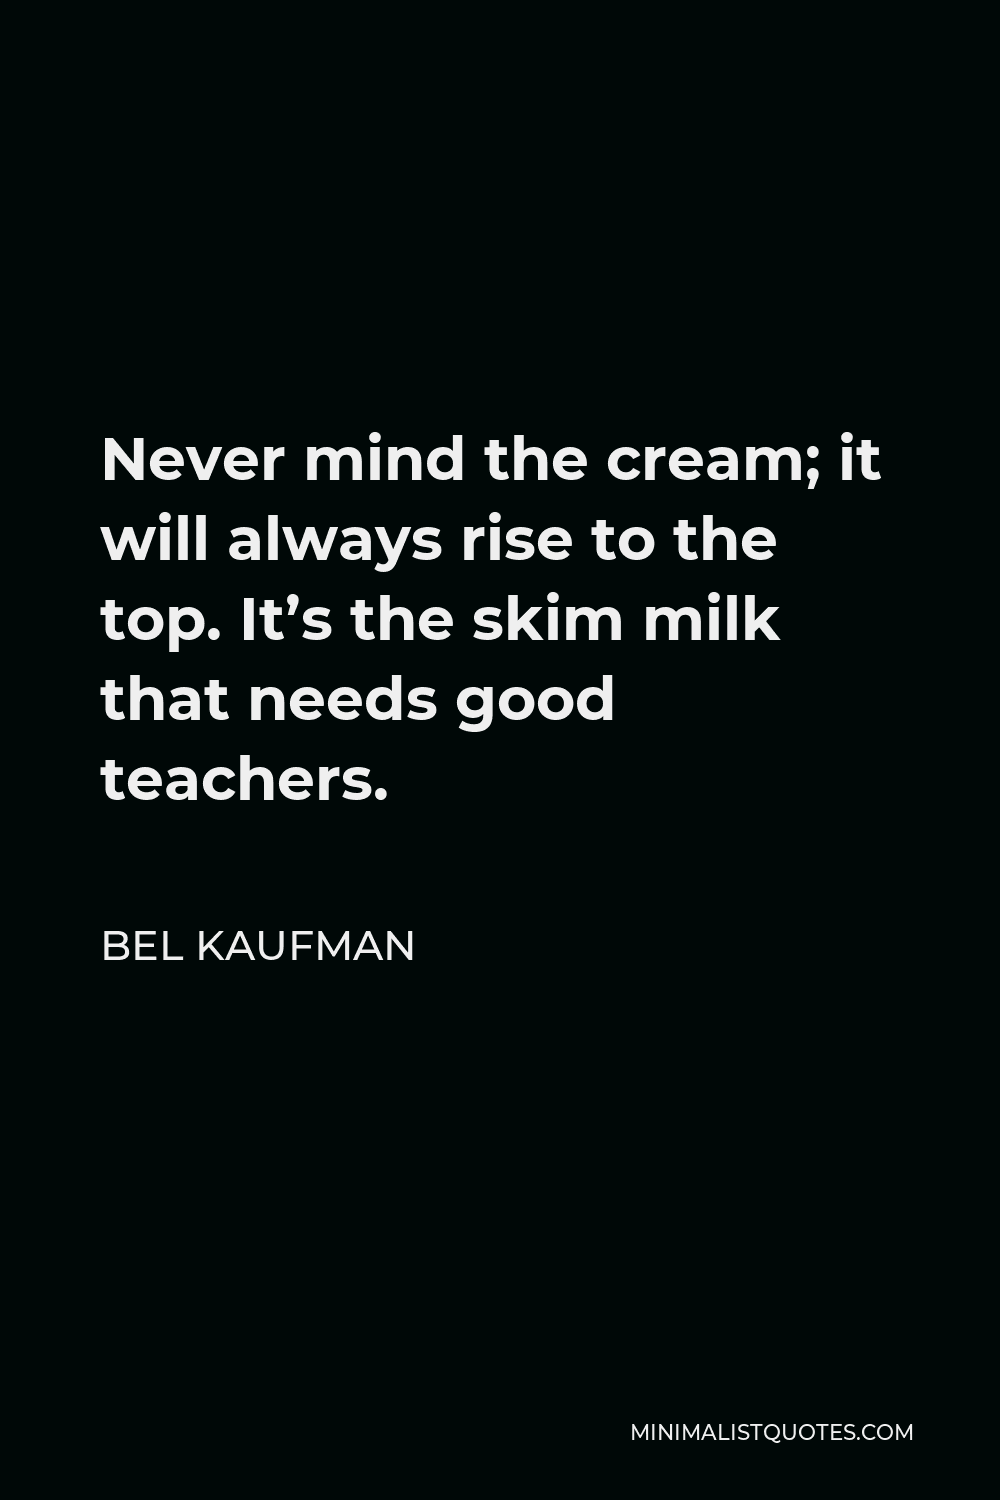 Bel Kaufman Quote - Never mind the cream; it will always rise to the top. It’s the skim milk that needs good teachers.